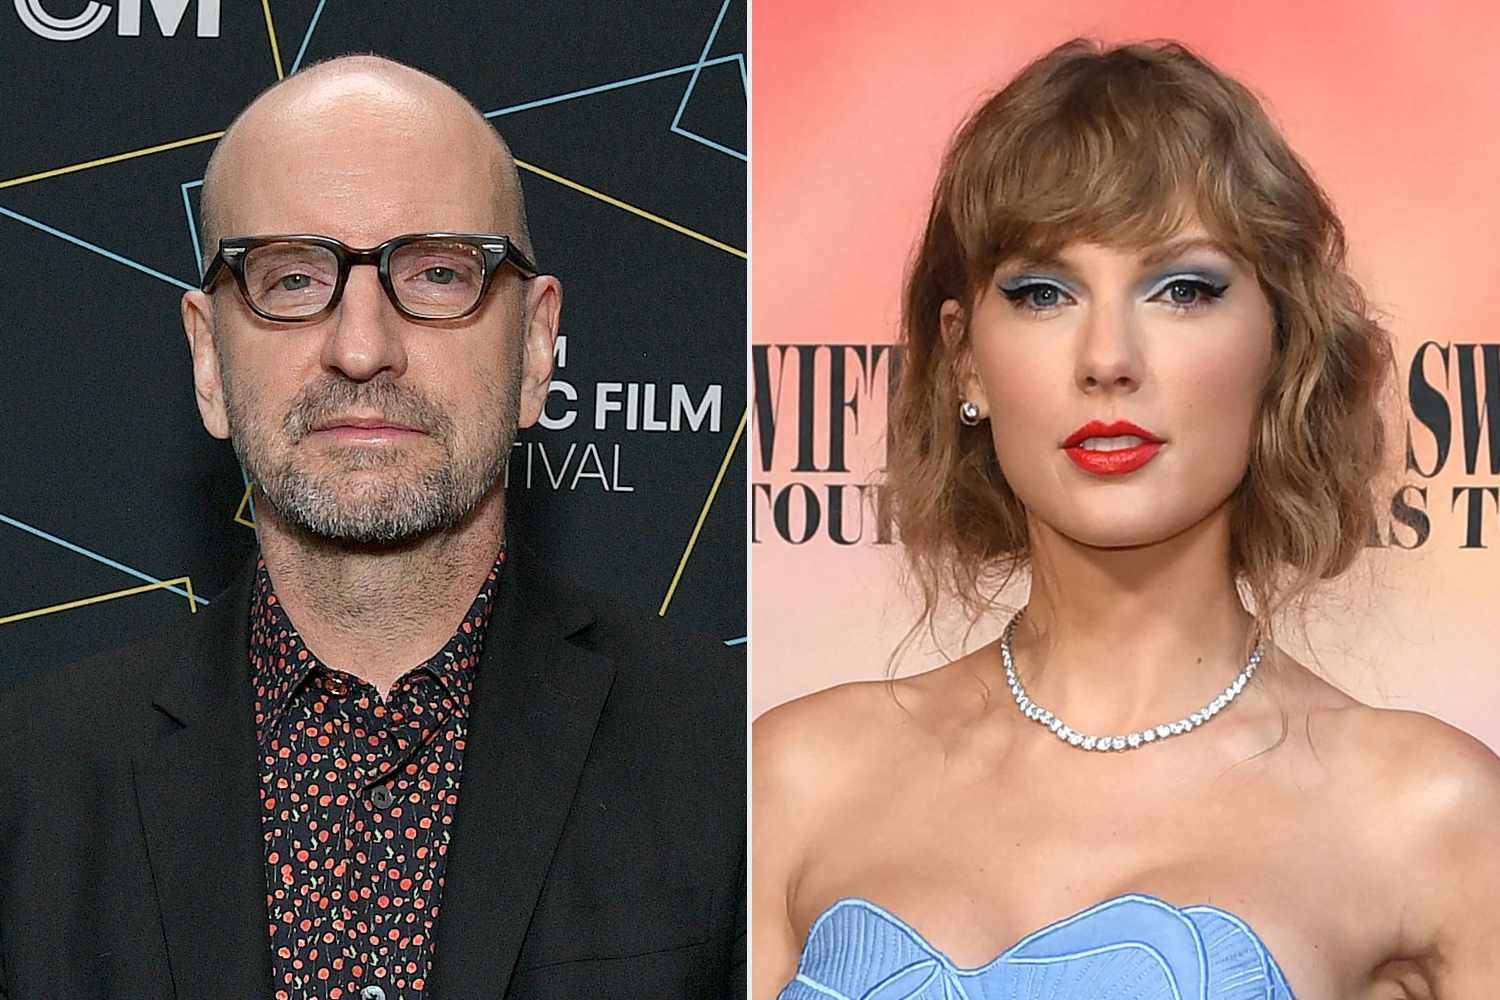 Steven Soderbergh really wants Taylor Swift Eras Tour tickets: 'I can't get in'